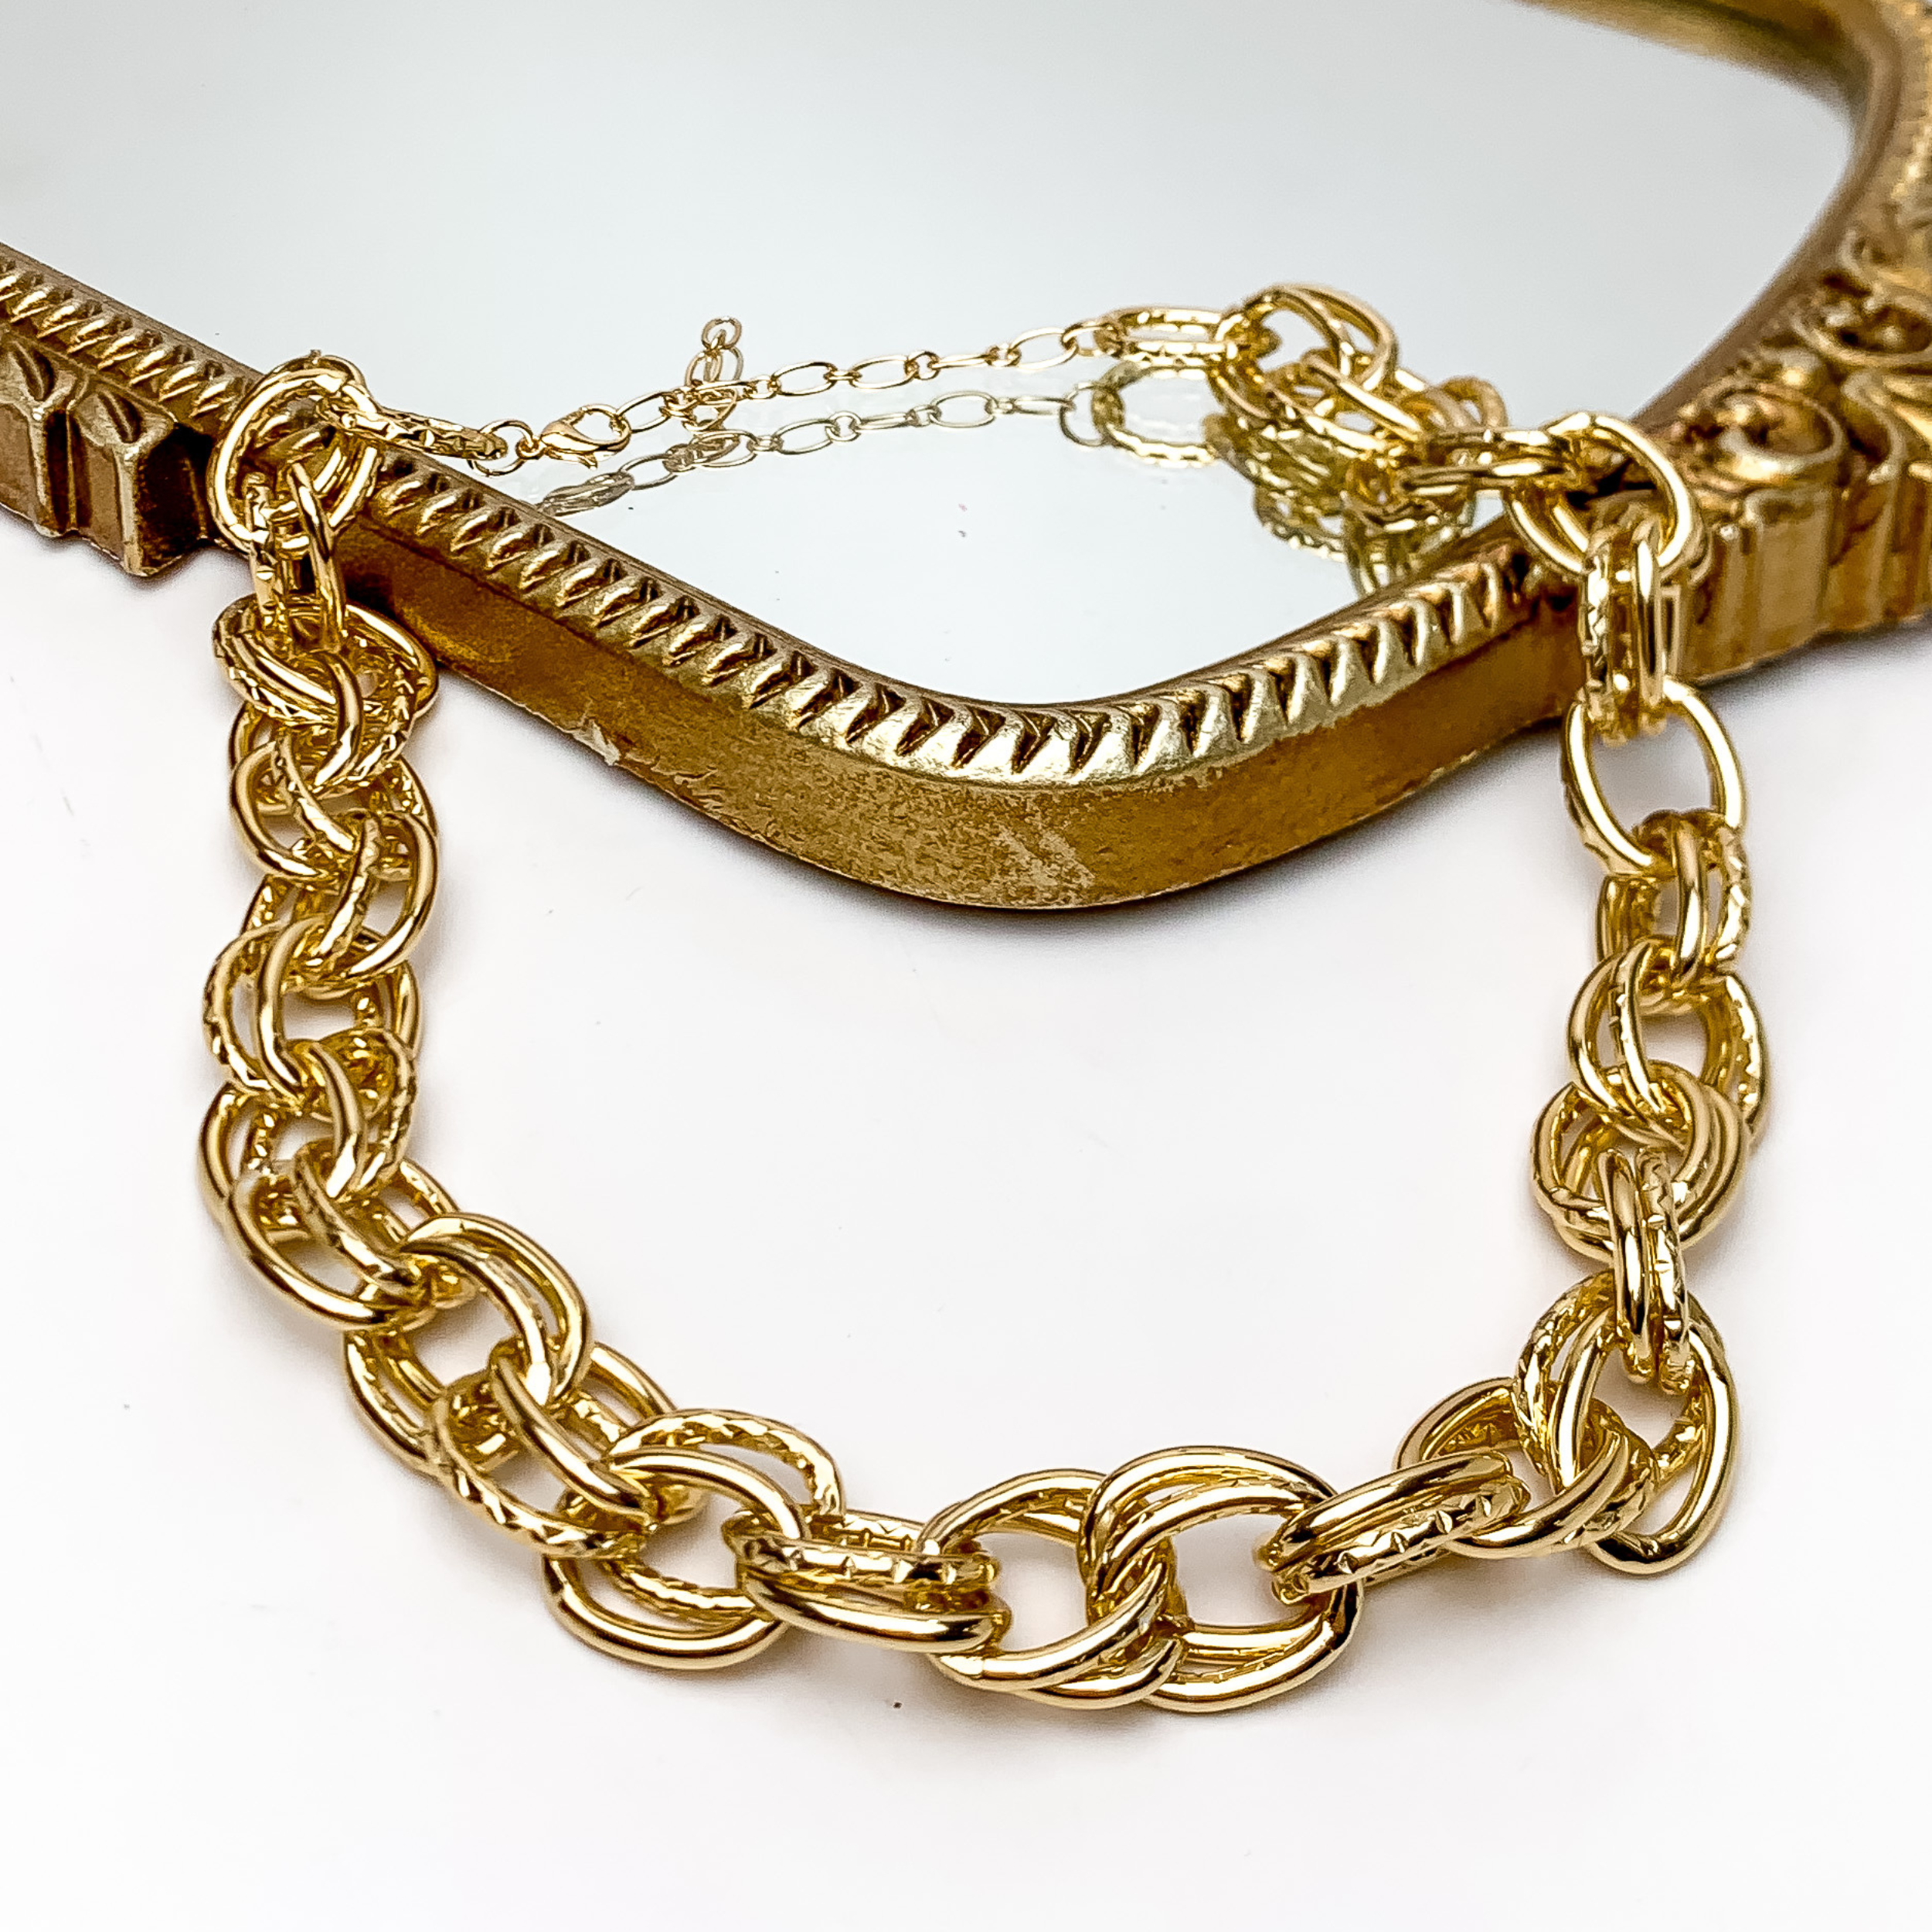 Classic Chunky Gold Tone Chain Necklace. Pictured on a white background with part of the necklace on a gold trimmed mirror.